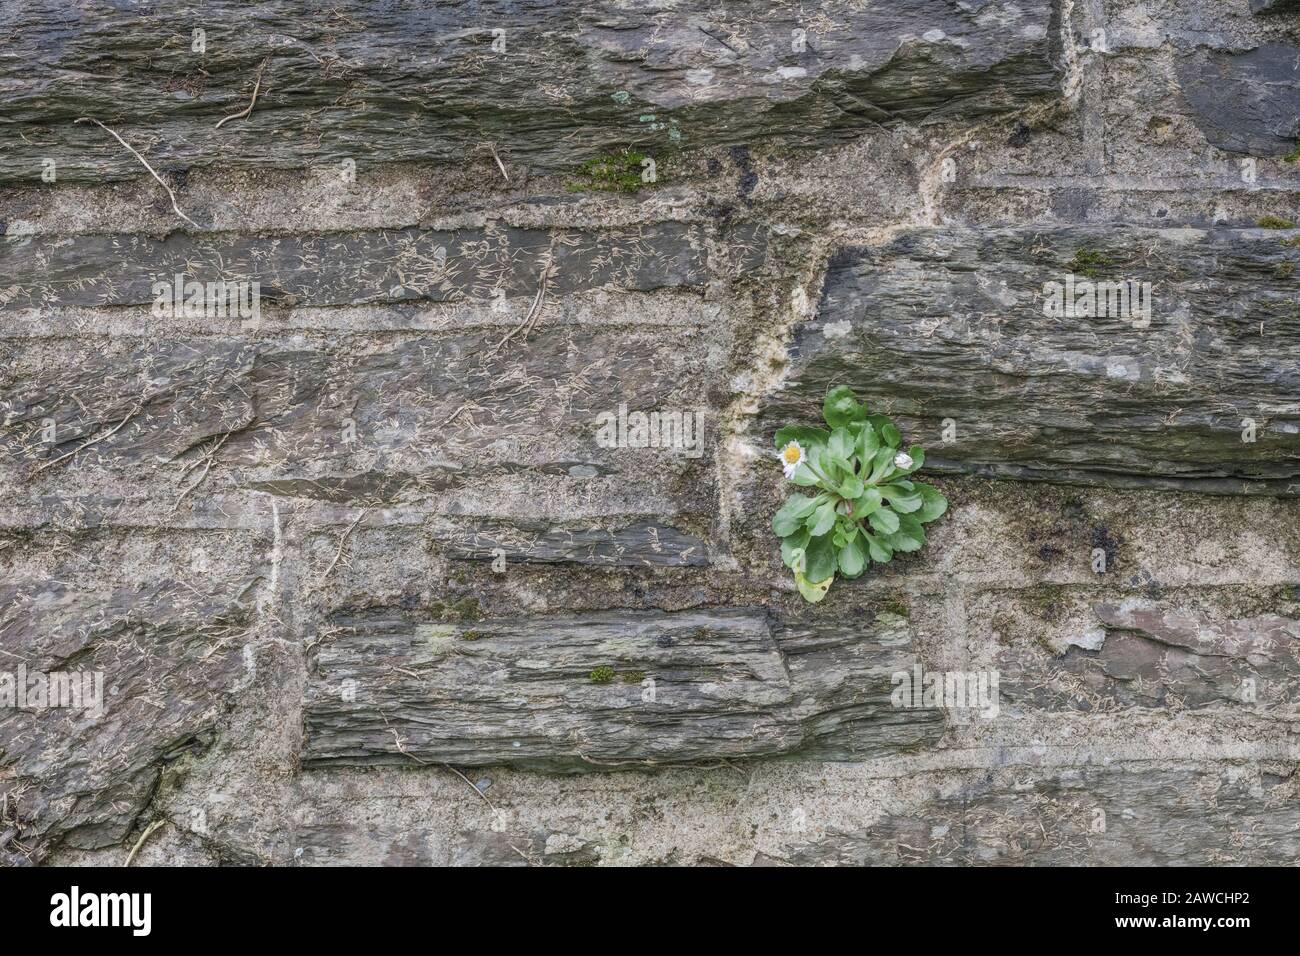 Solitary isolated Common Daisy / Bellis perennis plant growing in stone wall. Daisy once used as medicinal plant in herbal remedies. For isolation. Stock Photo